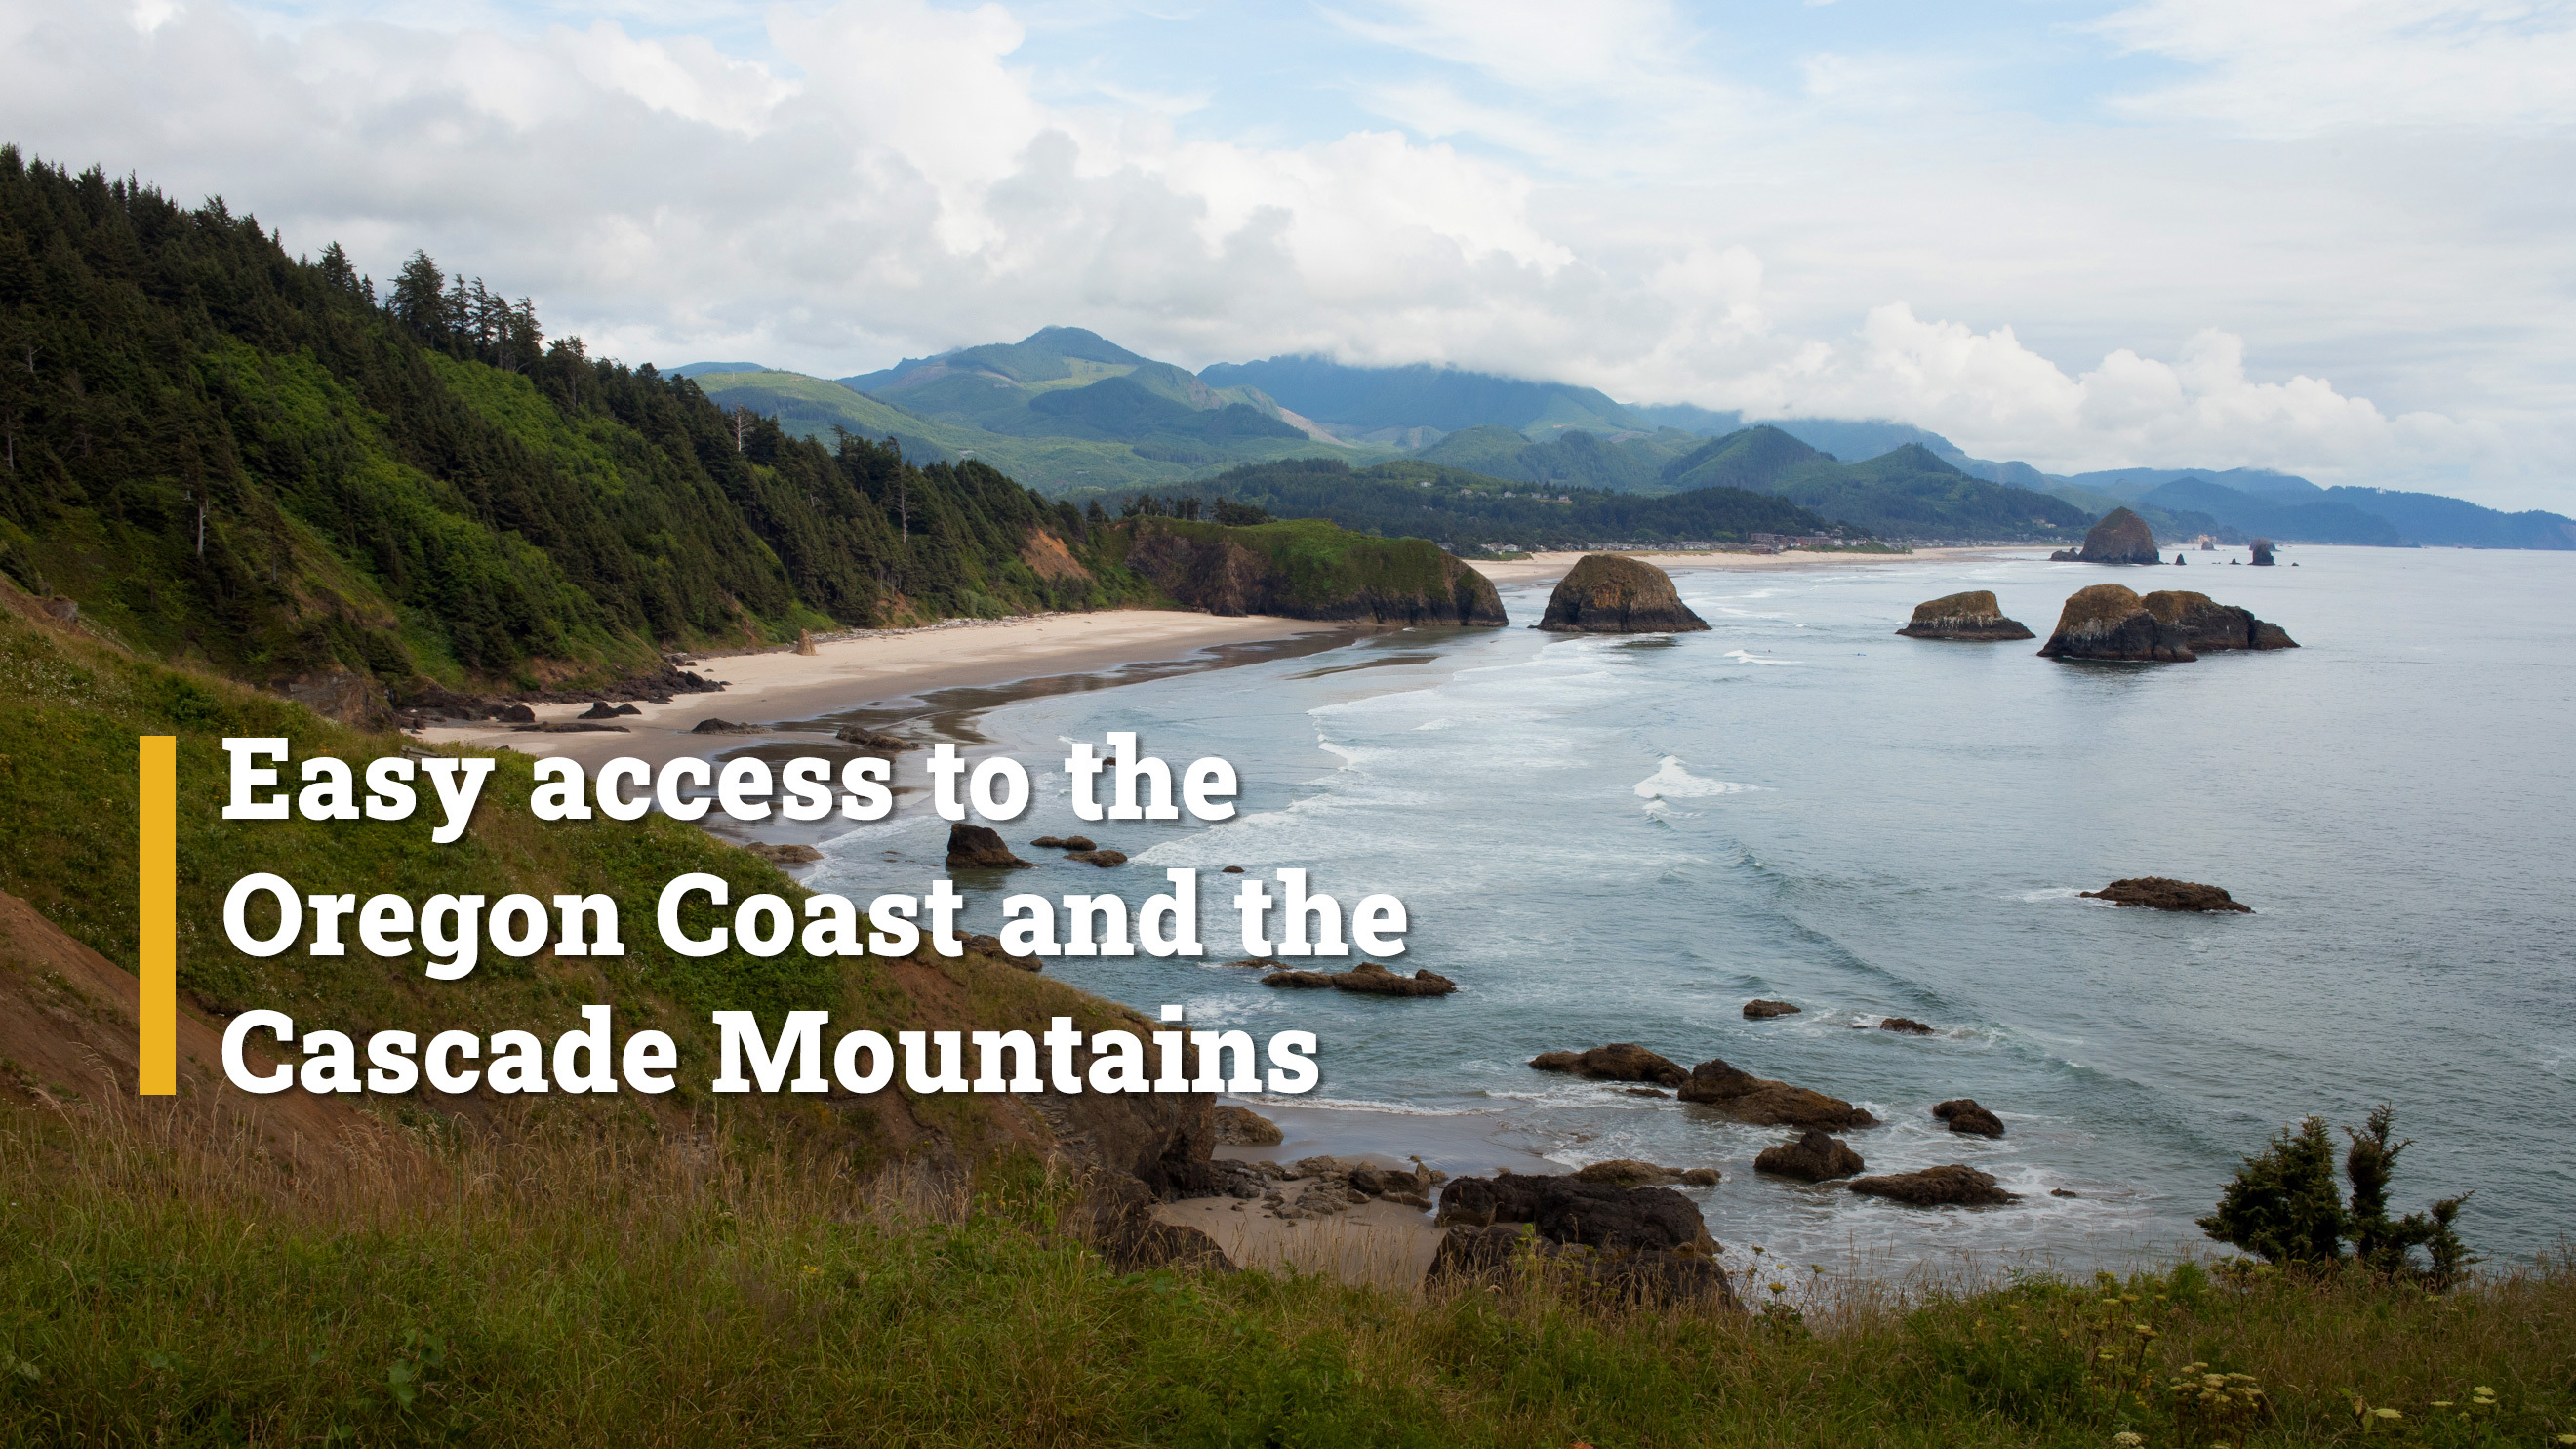 Easy access to the Oregon Coast and the Cascade Mountains